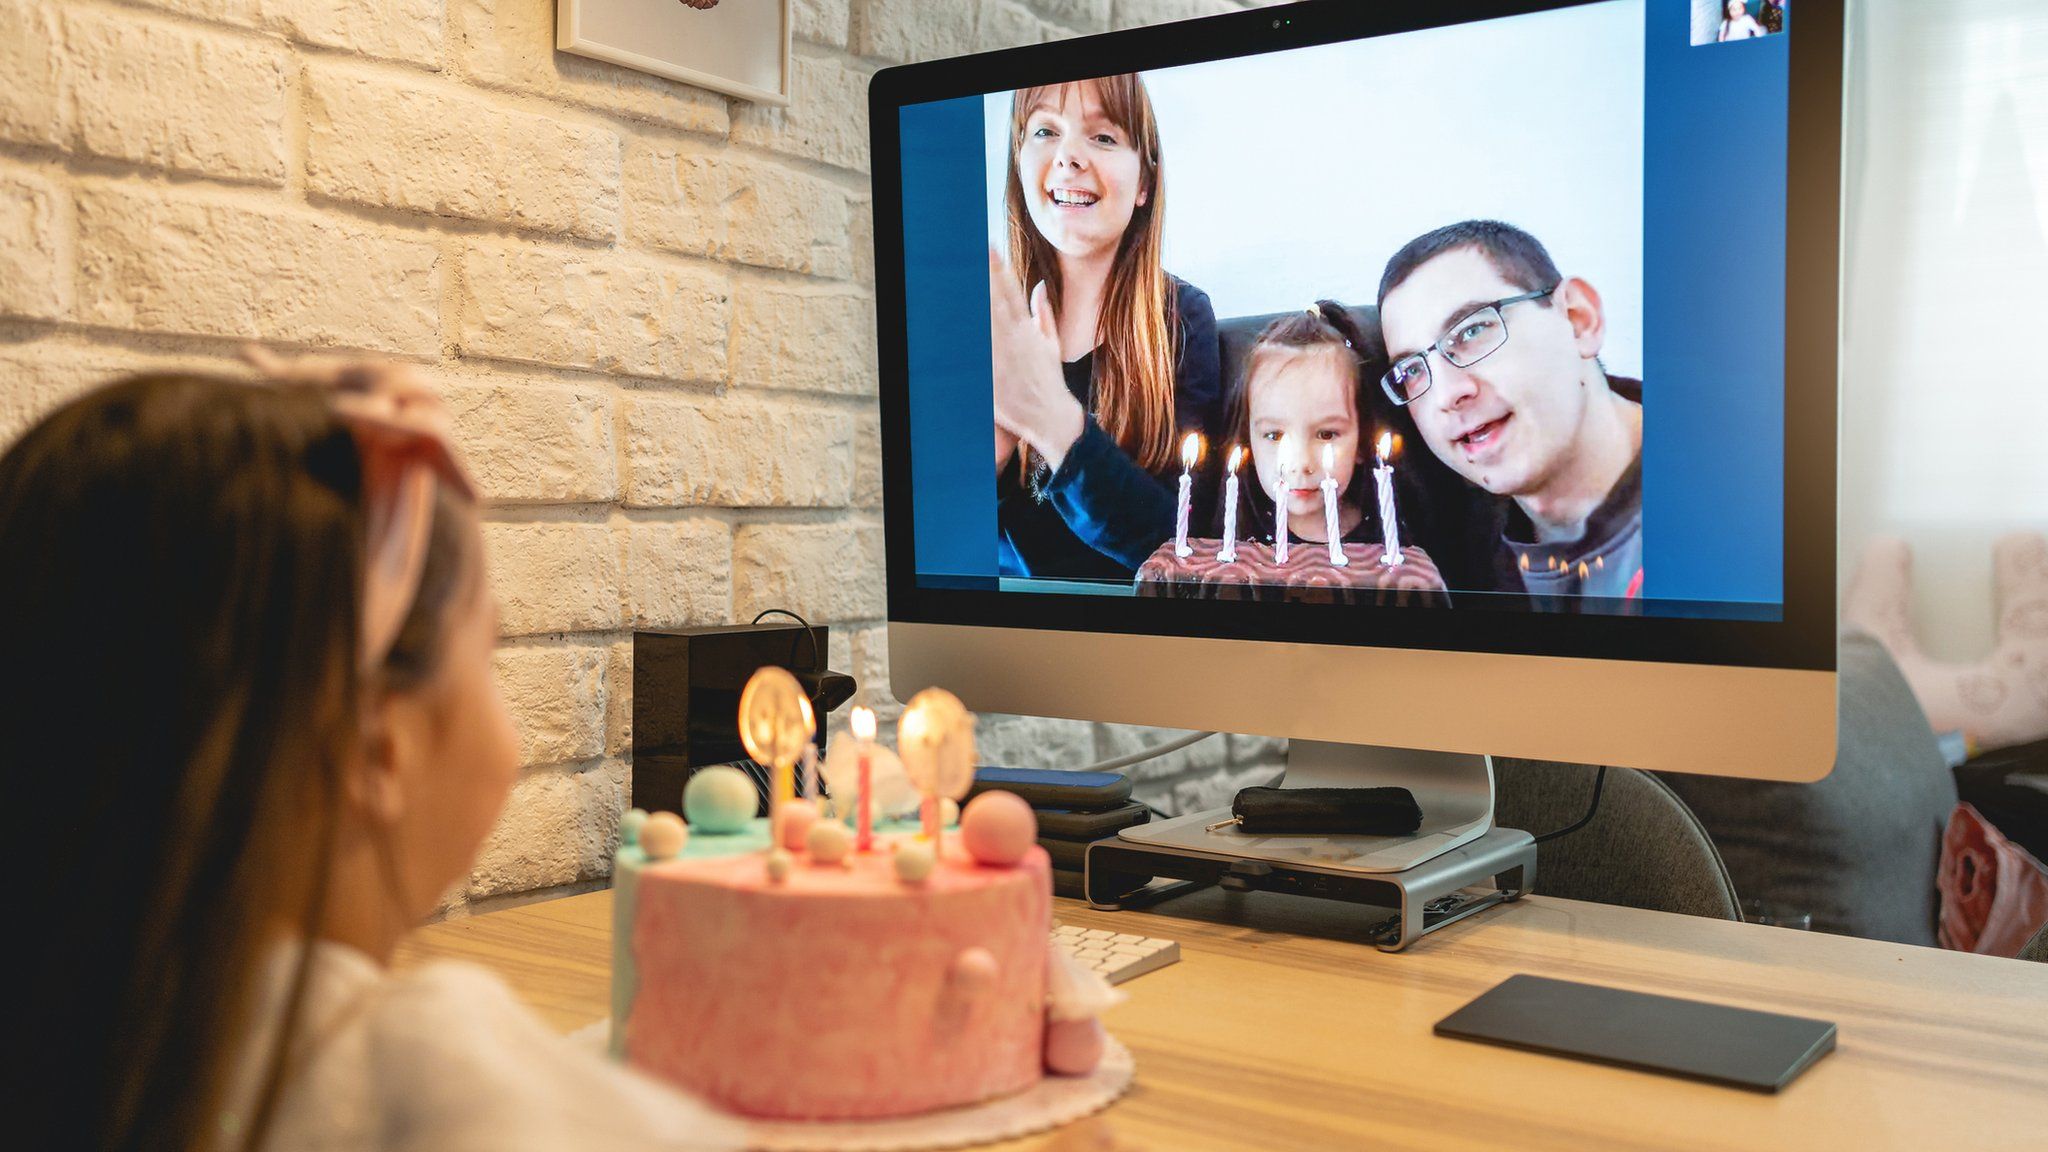 girl-celebrating-birthday-with-friends-via-video-chat